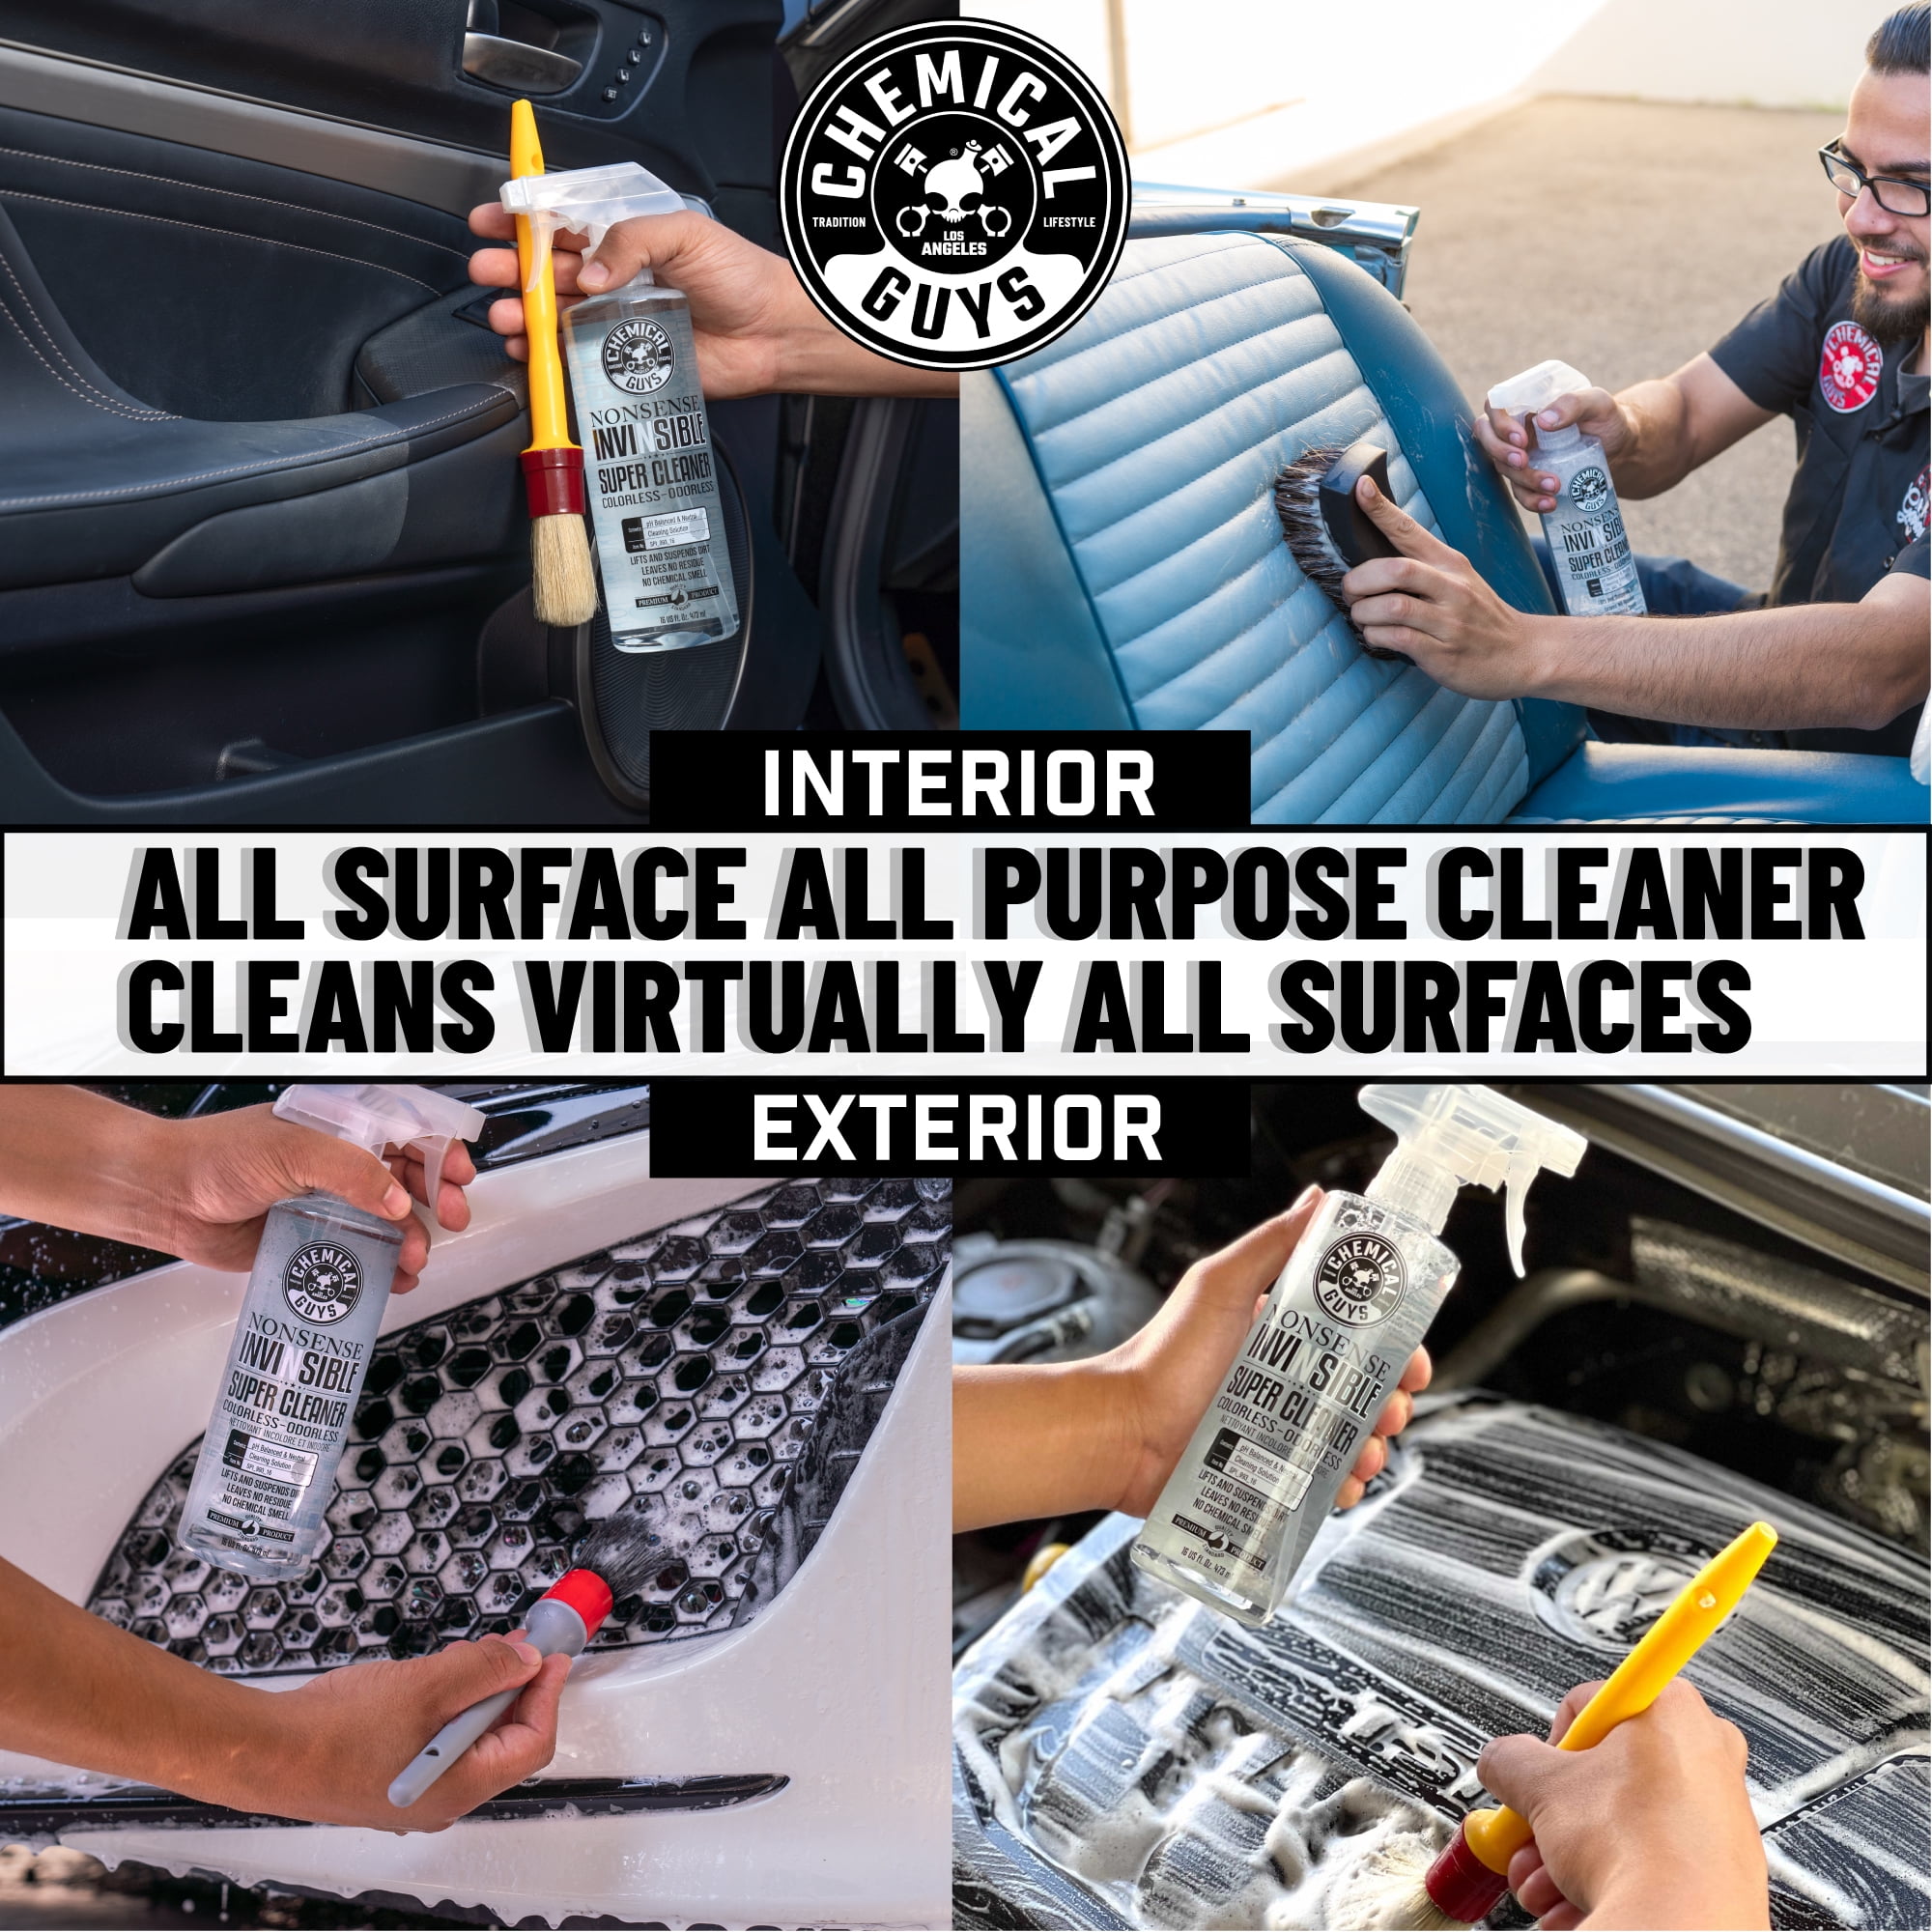 Erase years of dirt and grime with Nonsense All Purpose Cleaner!💪 Nonsense  is the colorless, odorless, and all-purpose super cleaner that …